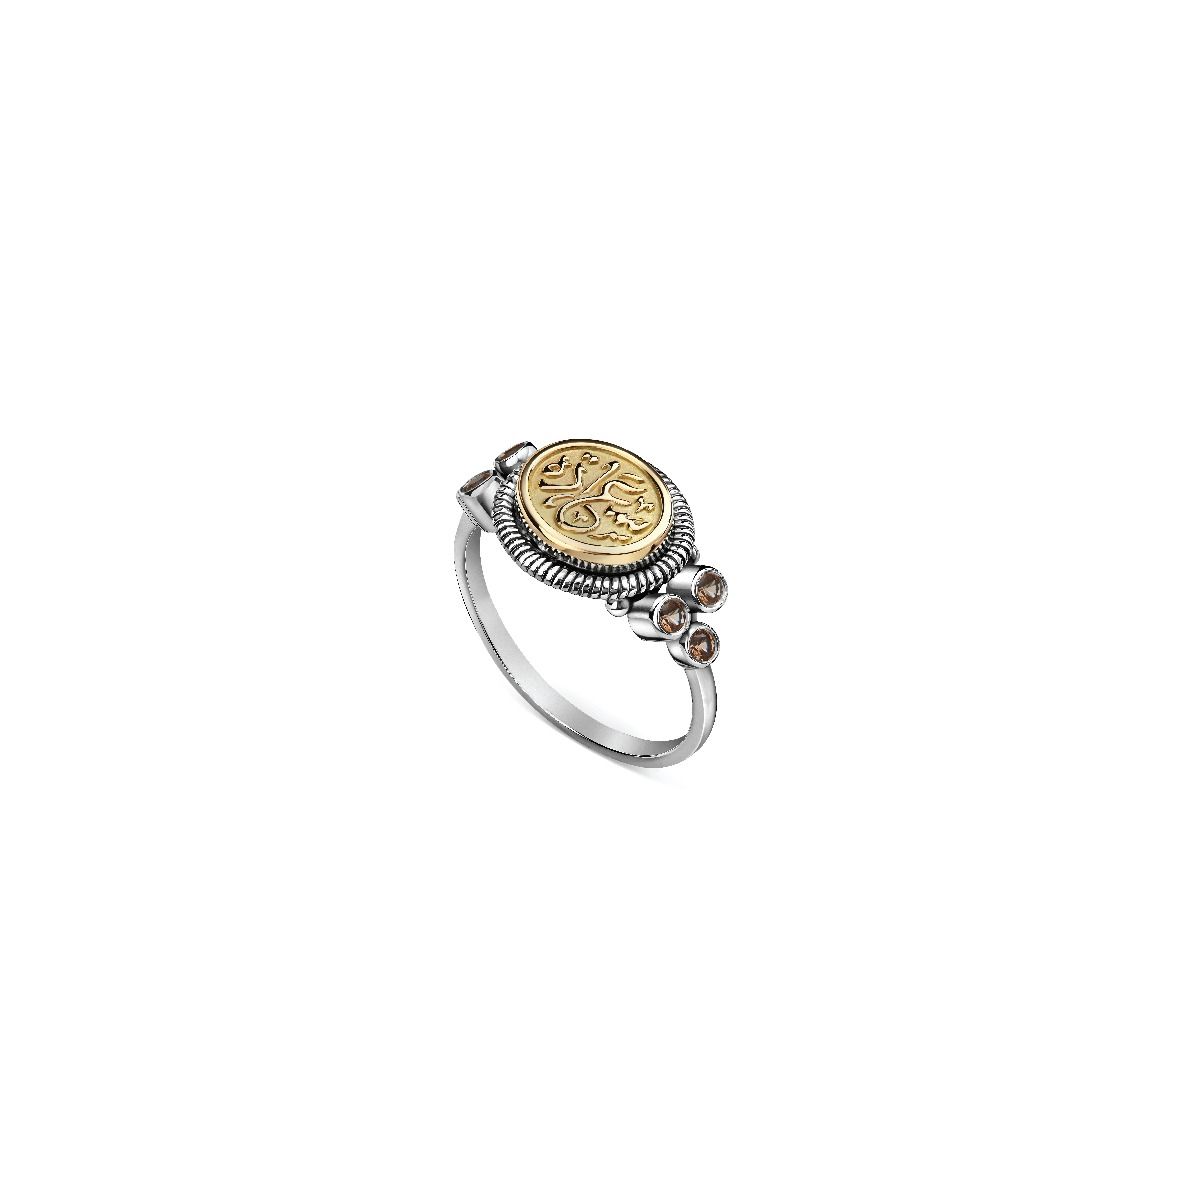 The Happiness Ring by Azza Fahmy - Designer Rings